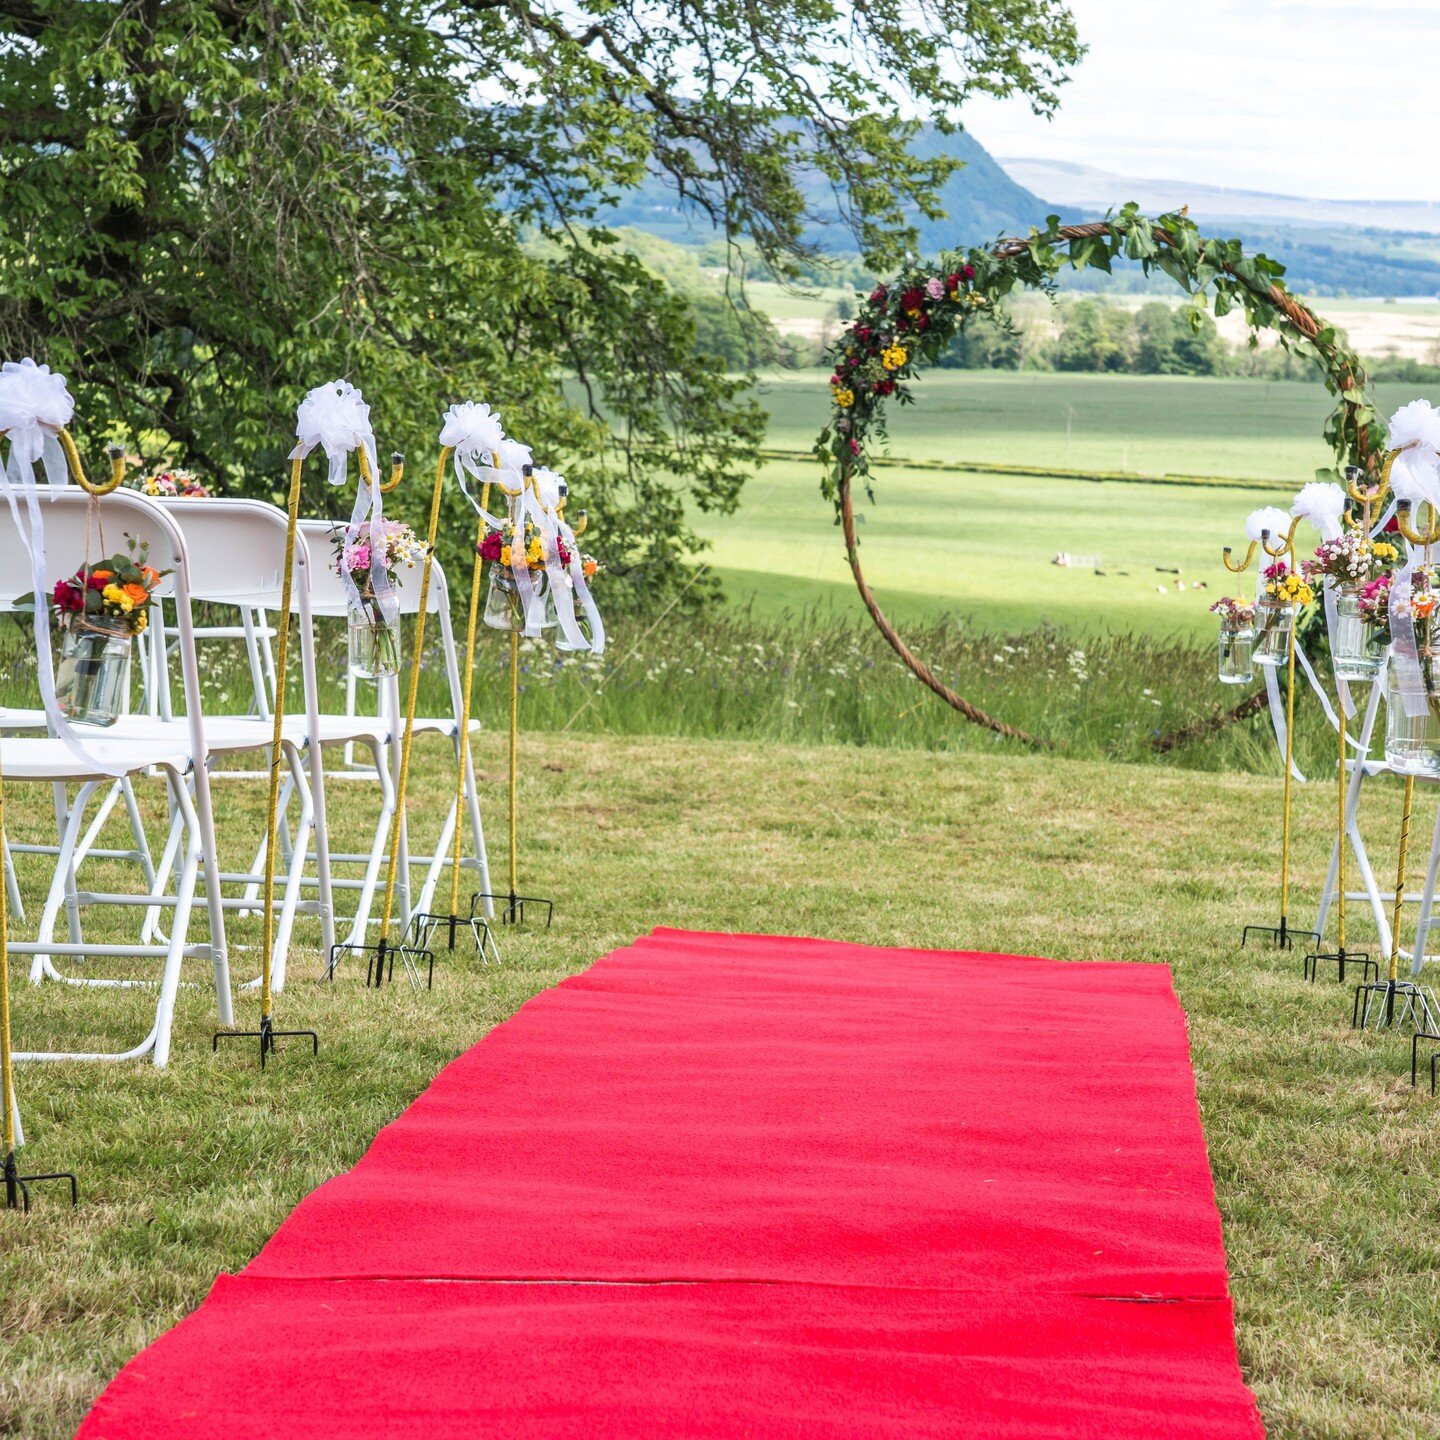 When you arrive to photograph a wedding and see how beautiful the set-up looks #weeddingphotography #outdoorweddingvenues #lochlomondweddingphotographer #lochlomondphotographer